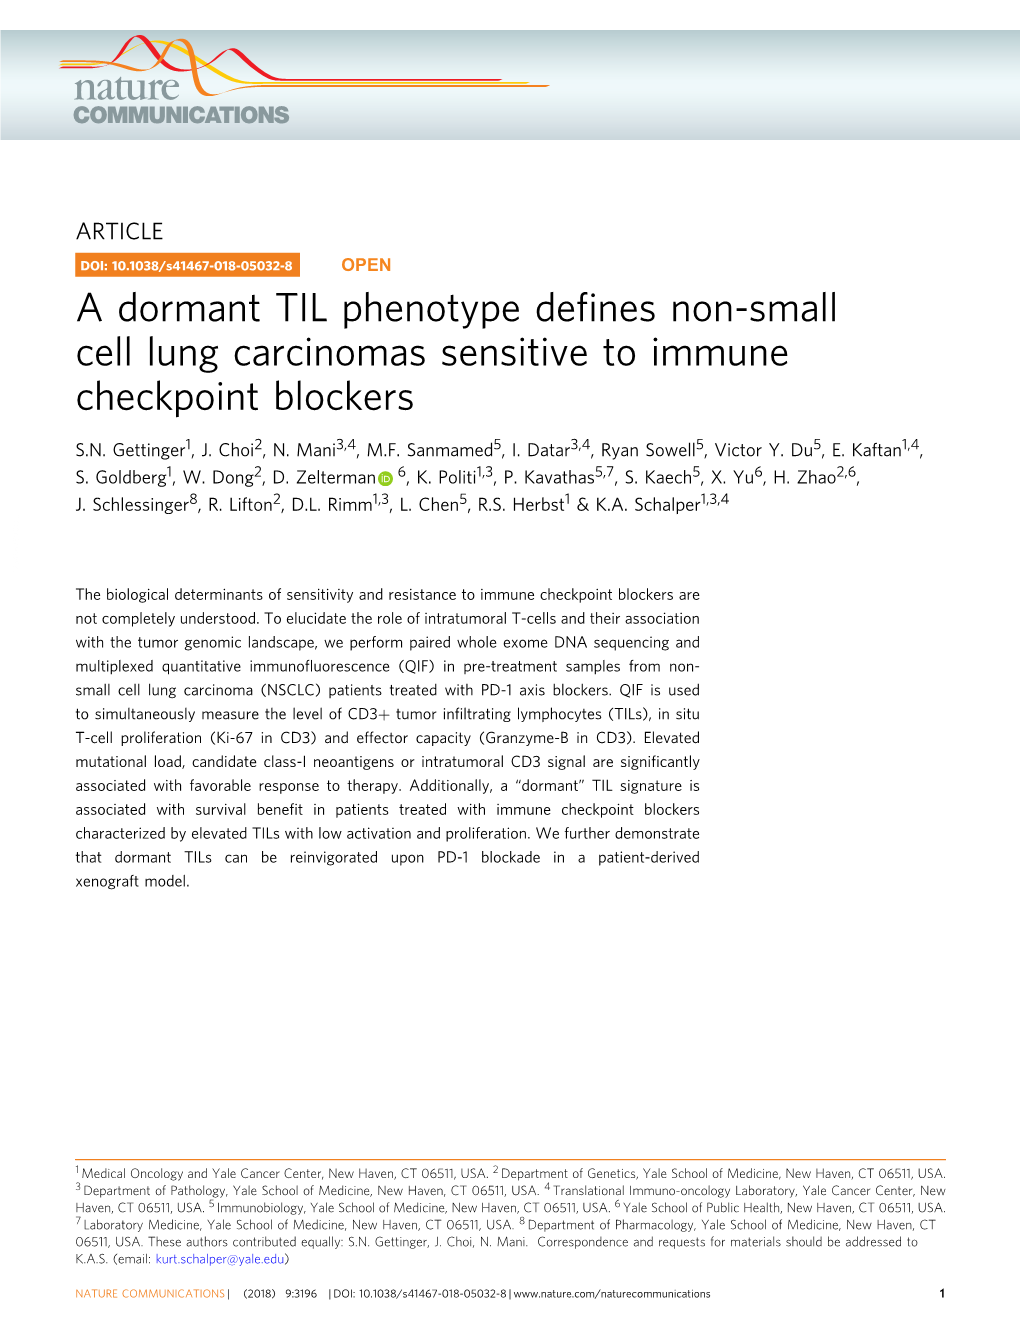 A Dormant TIL Phenotype Defines Non-Small Cell Lung Carcinomas